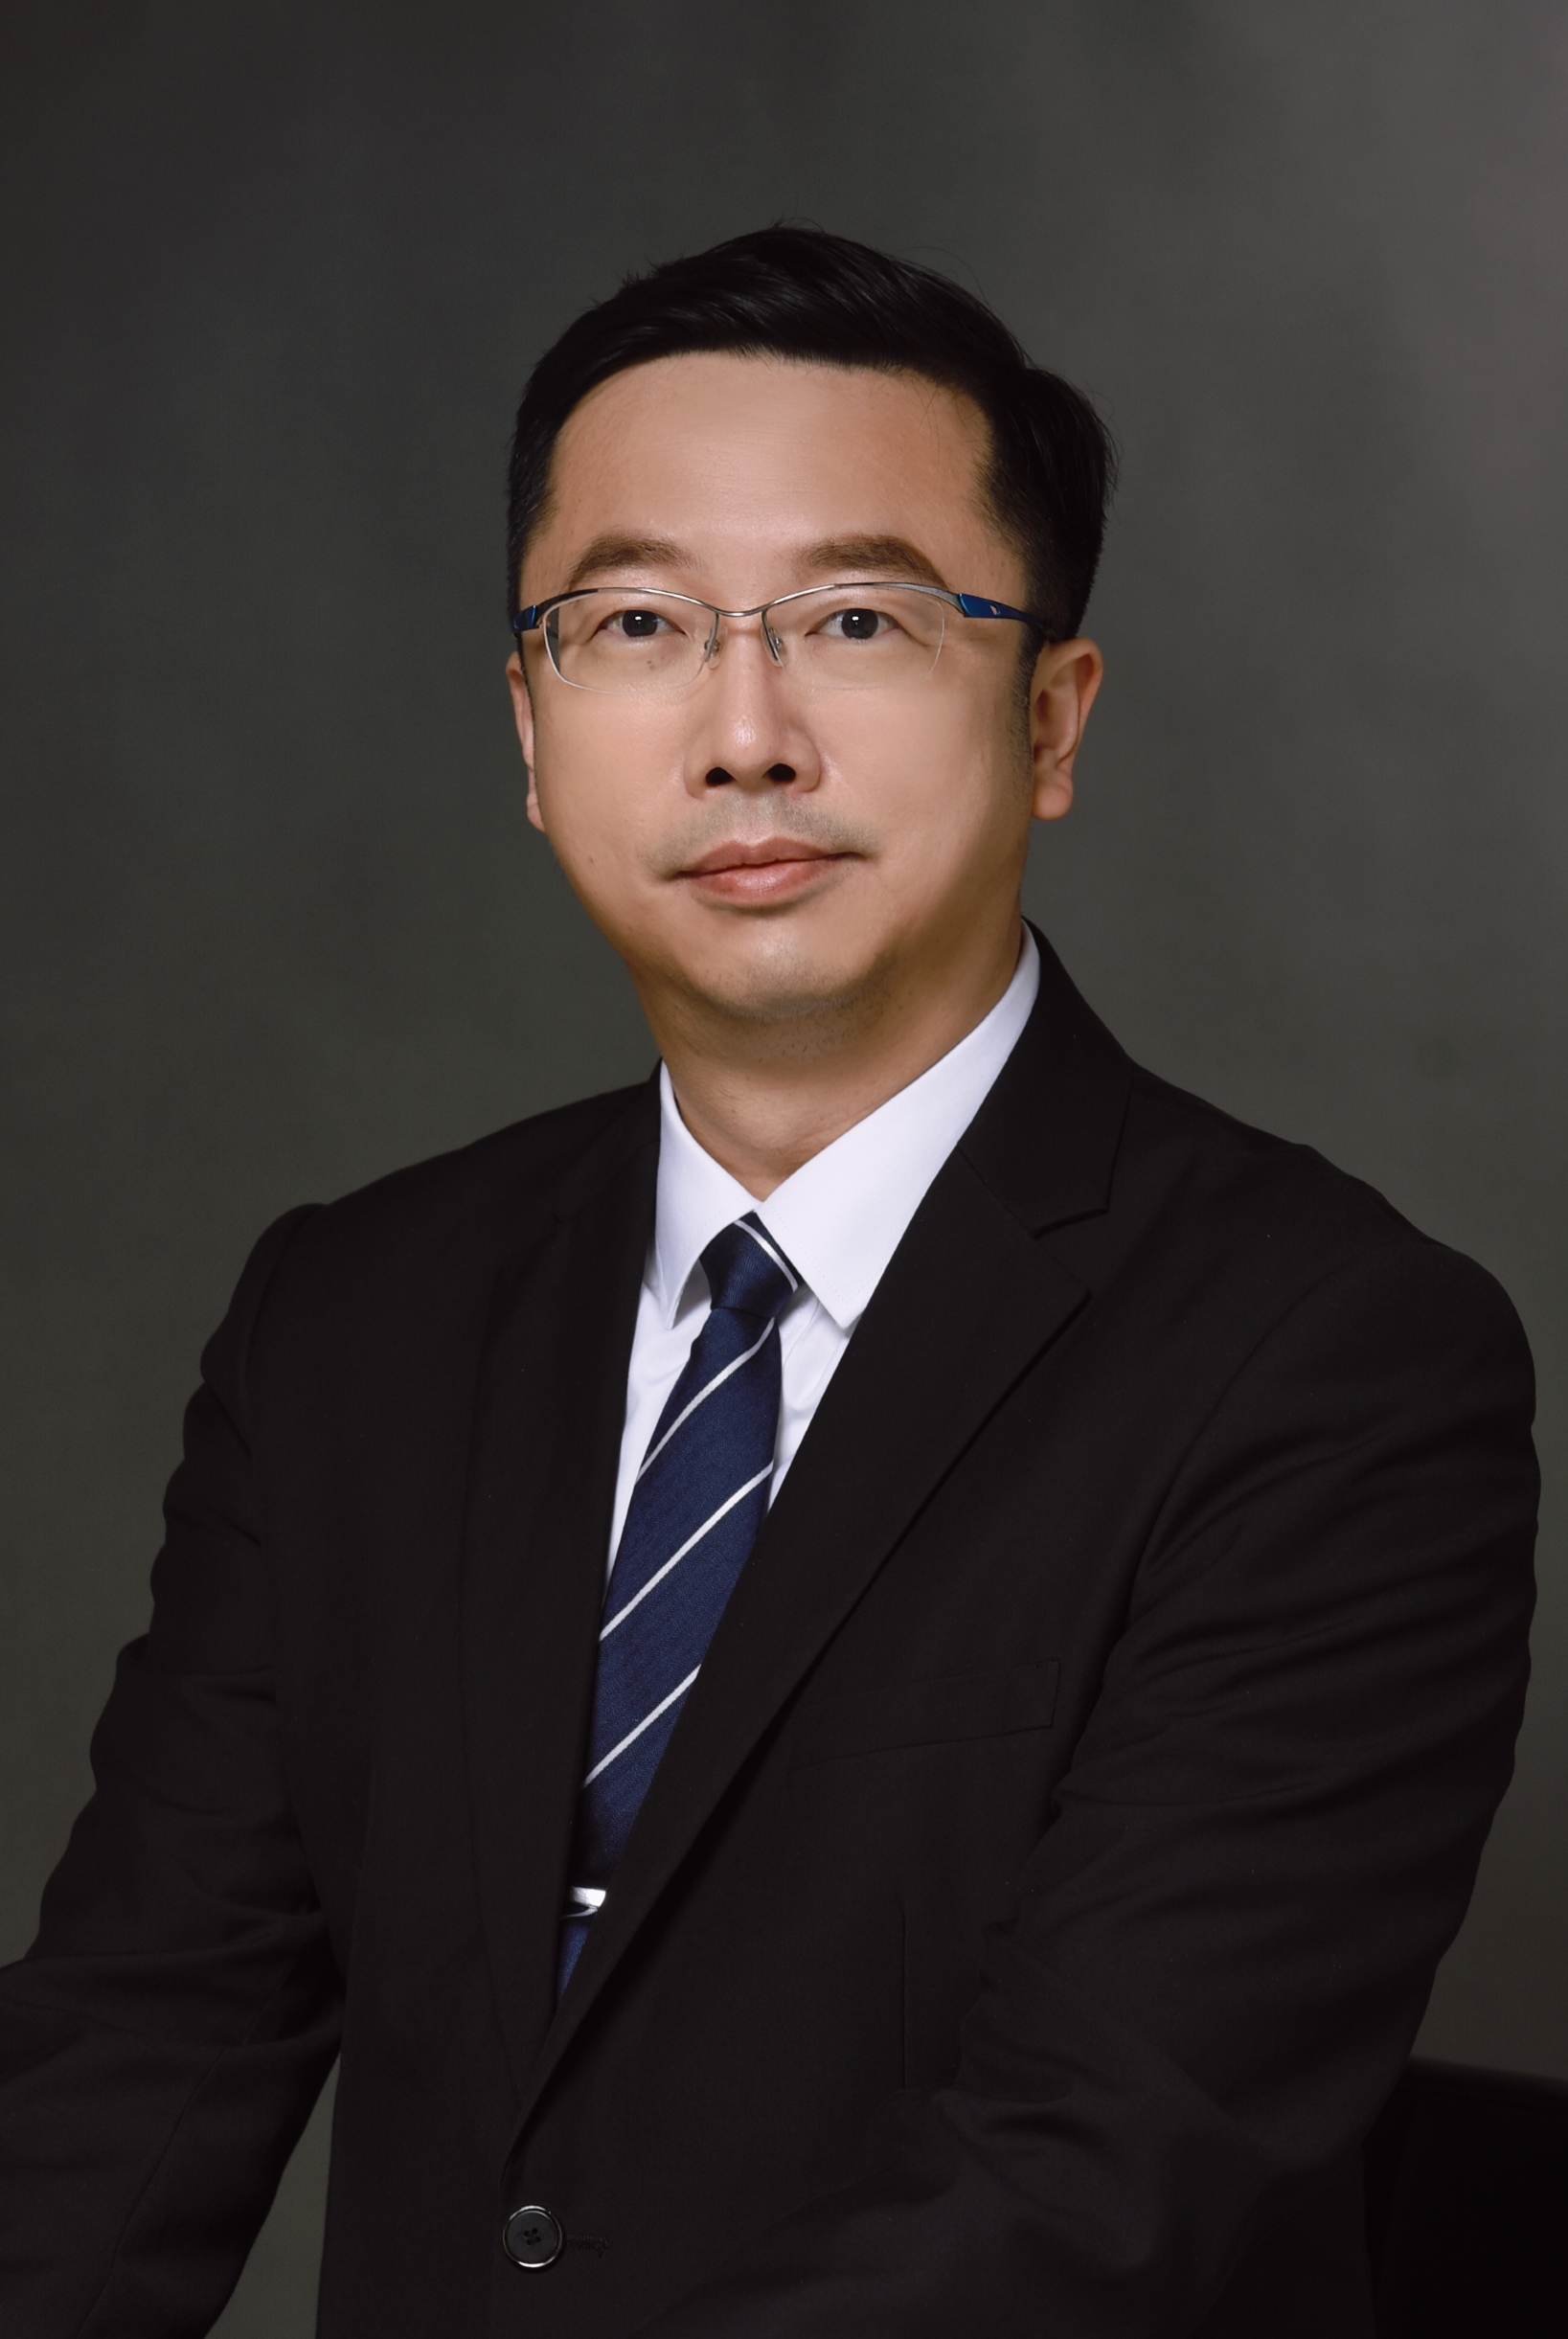 The Hospital Authority announced today (December 15) that Dr Michael Wong will be appointed as Director (Quality and Safety) with effect from December 19.